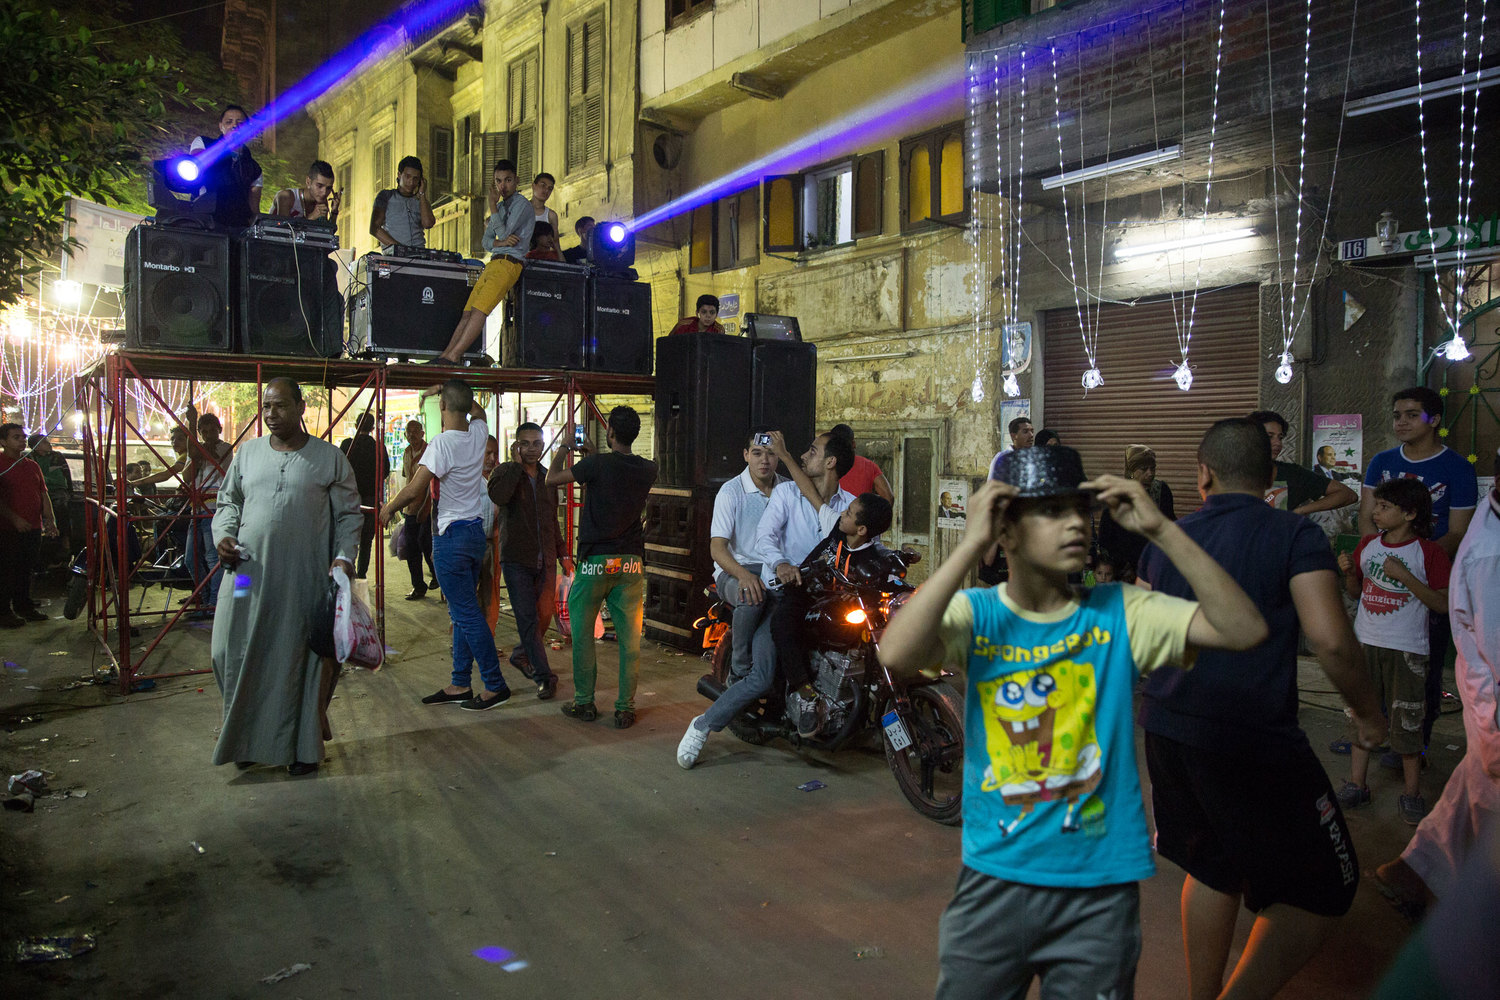  In a side street, local youth organized an electro-sha’abi dance party.  While the main streets are filled with the festival, the locals often stay in side streets at their own gatherings. 